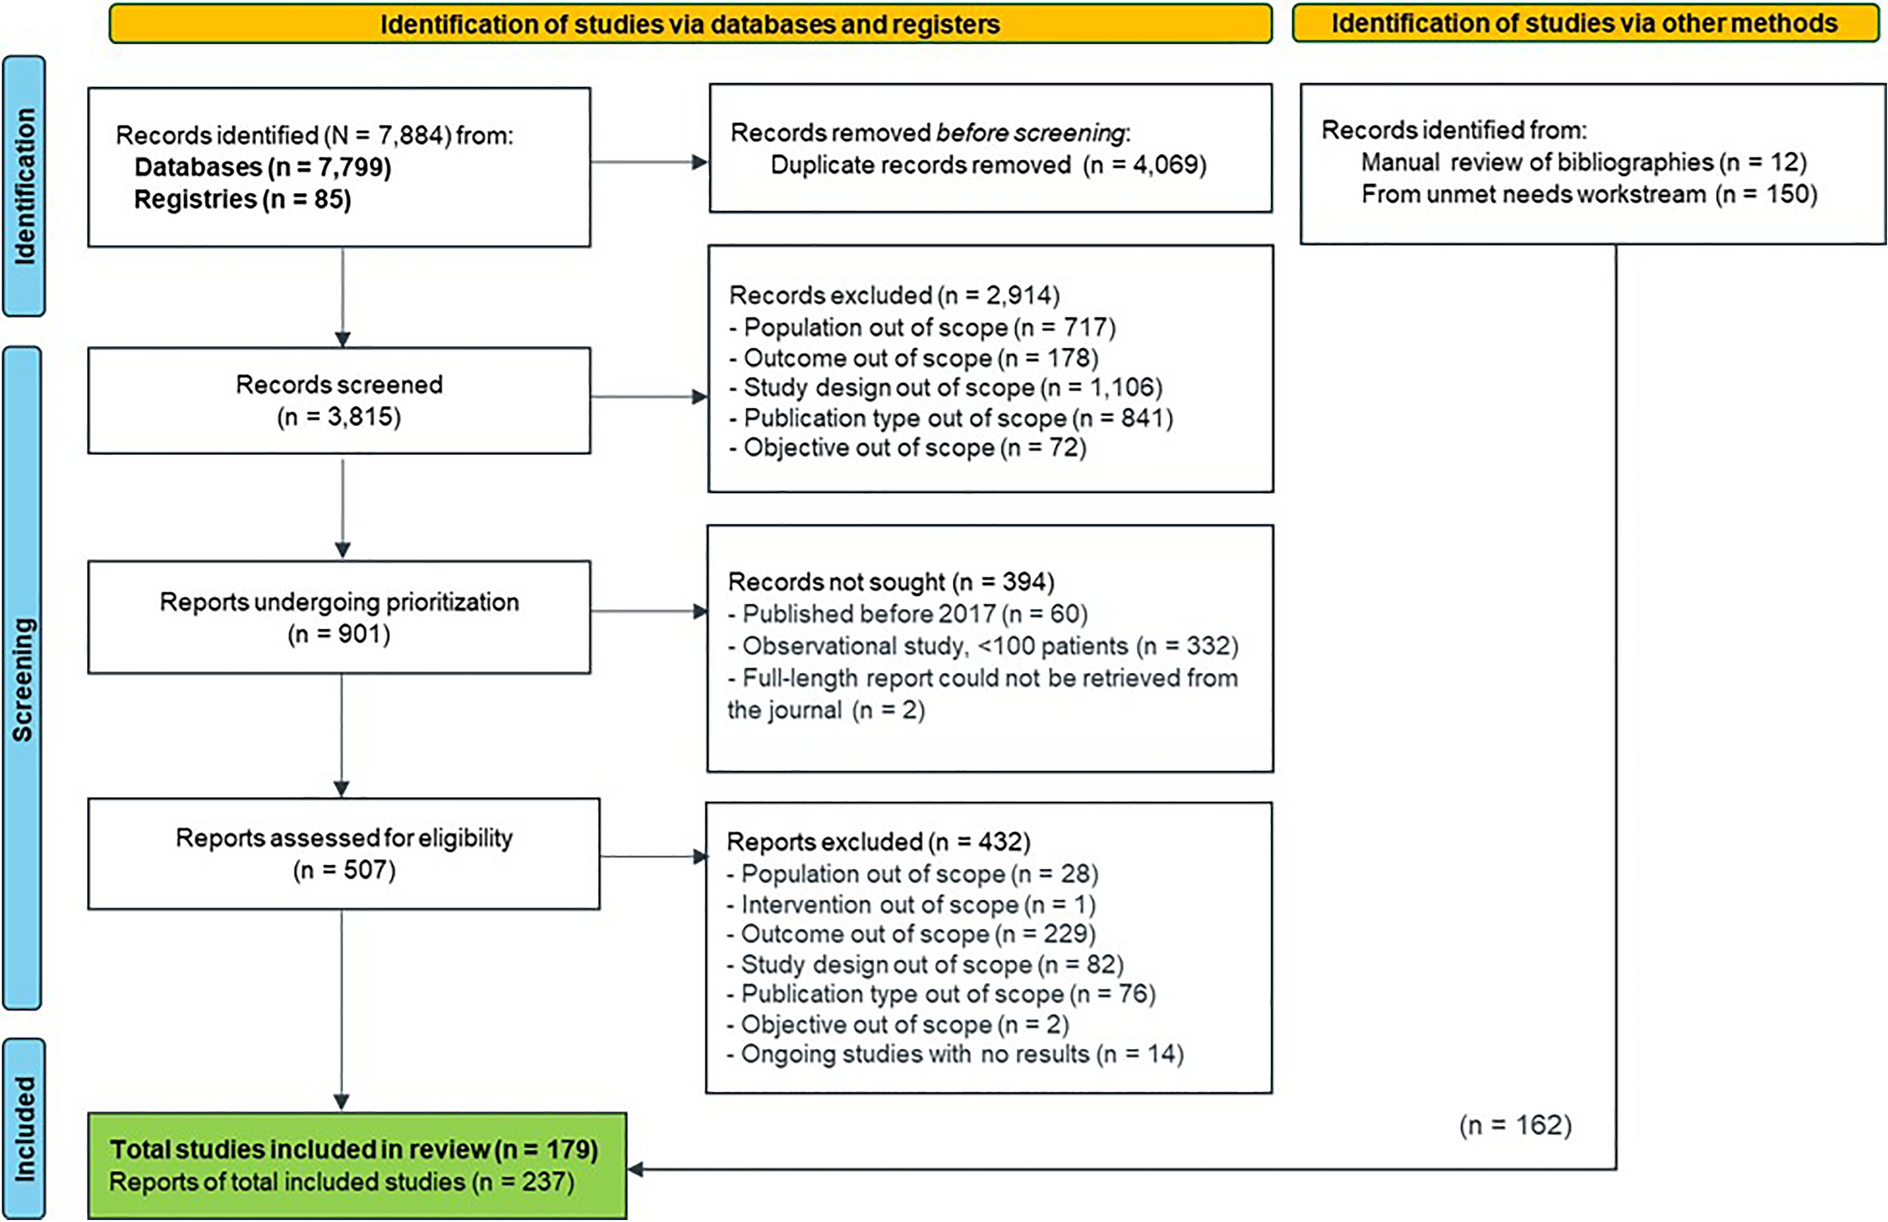 Clinical Management of Patients with Non-Small Cell Lung Cancer, Brain Metastases, and Actionable Genomic Alterations: A Systematic Literature Review